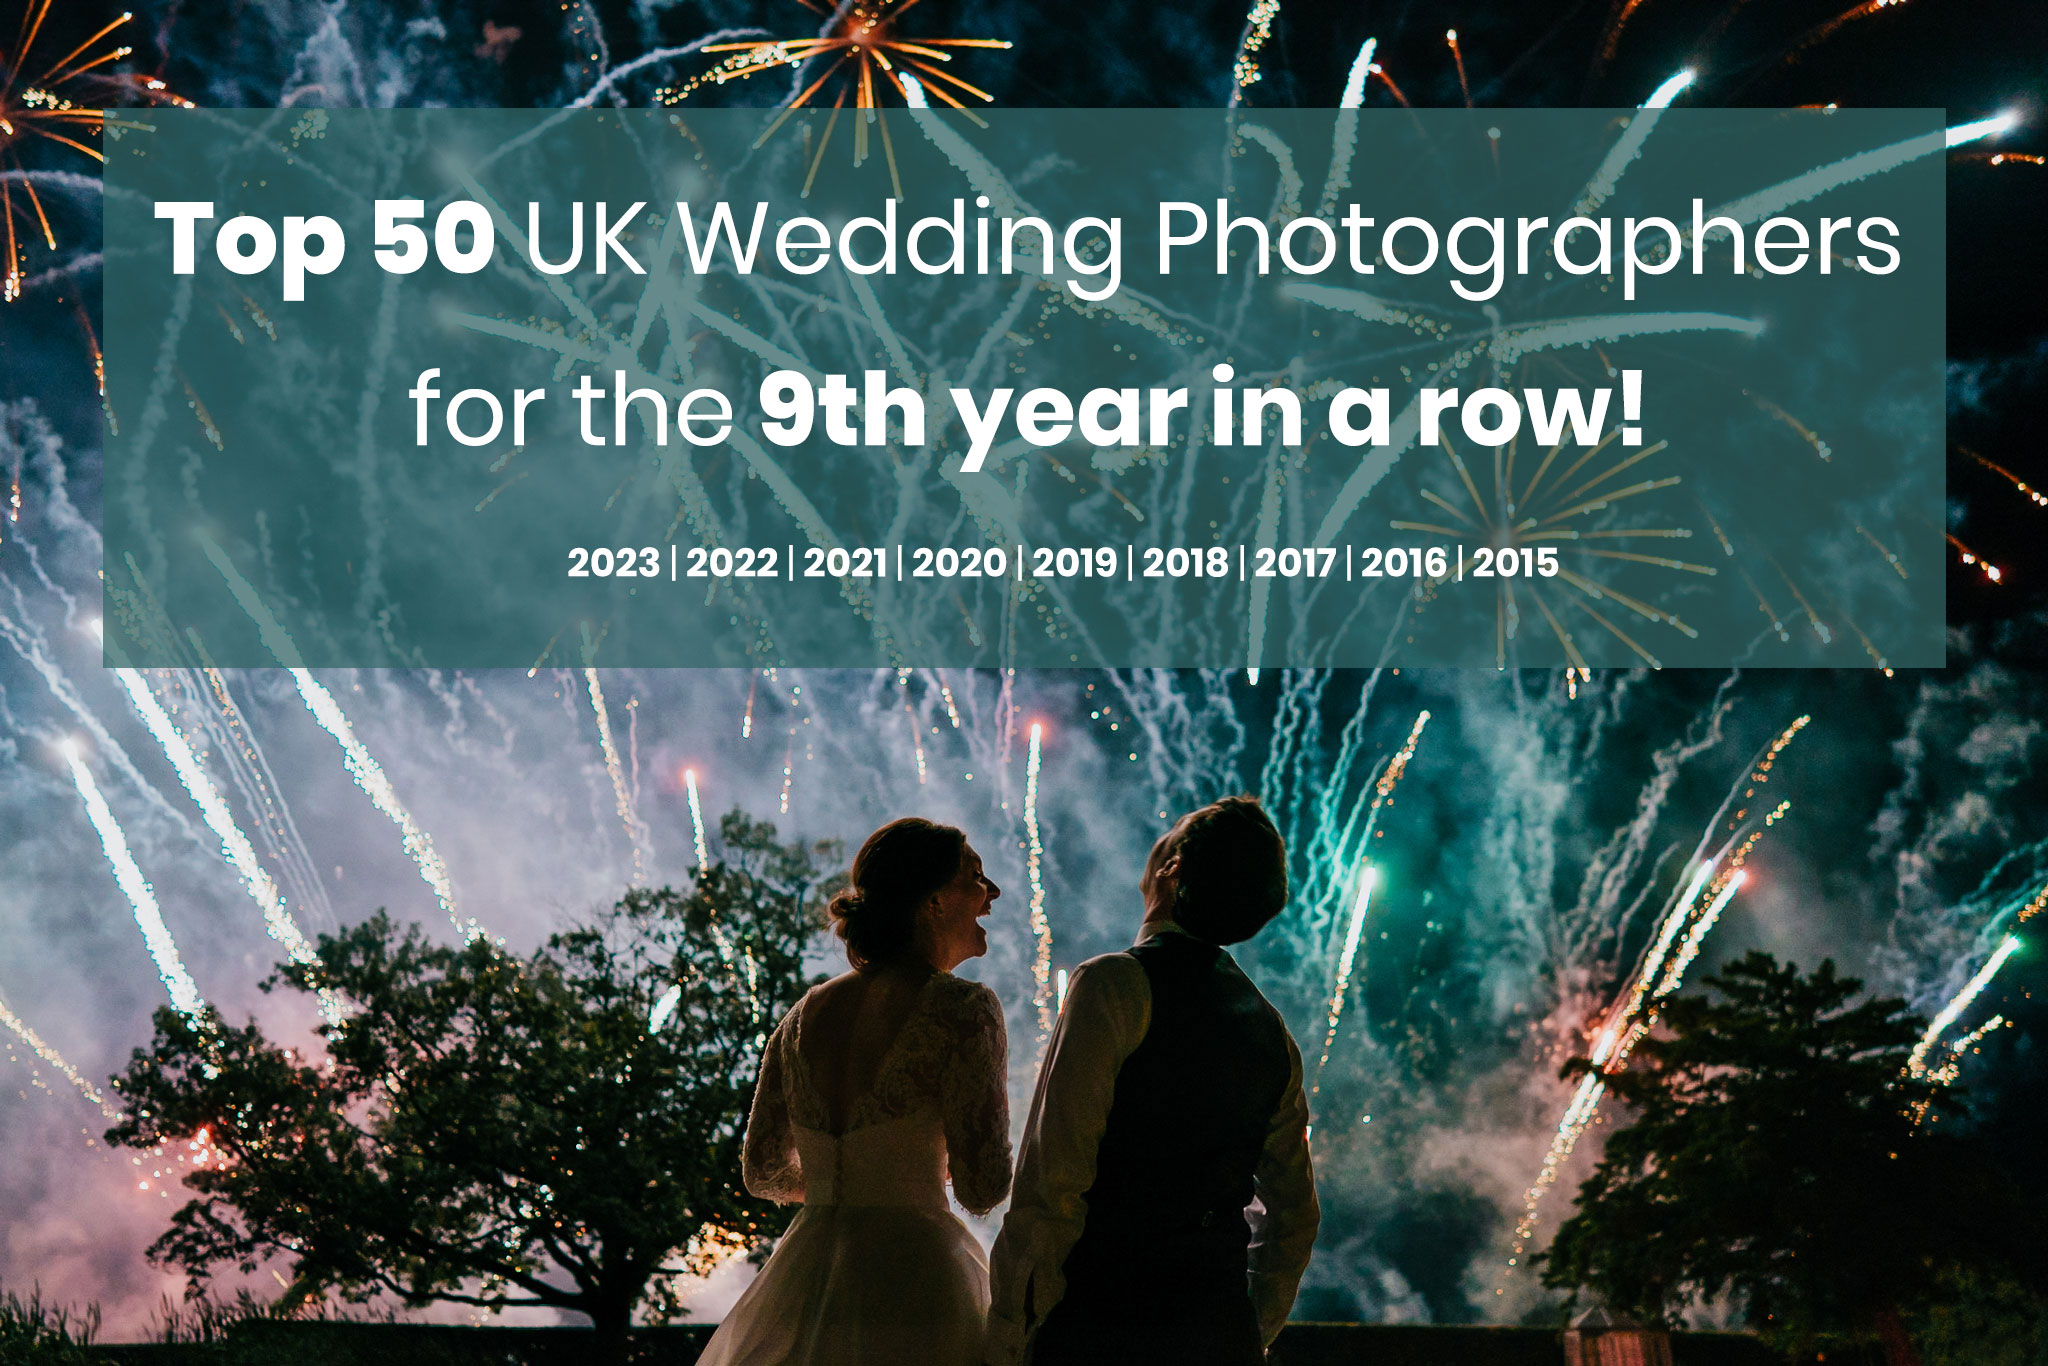 Top 50 UK wedding photographers 9th year in a row